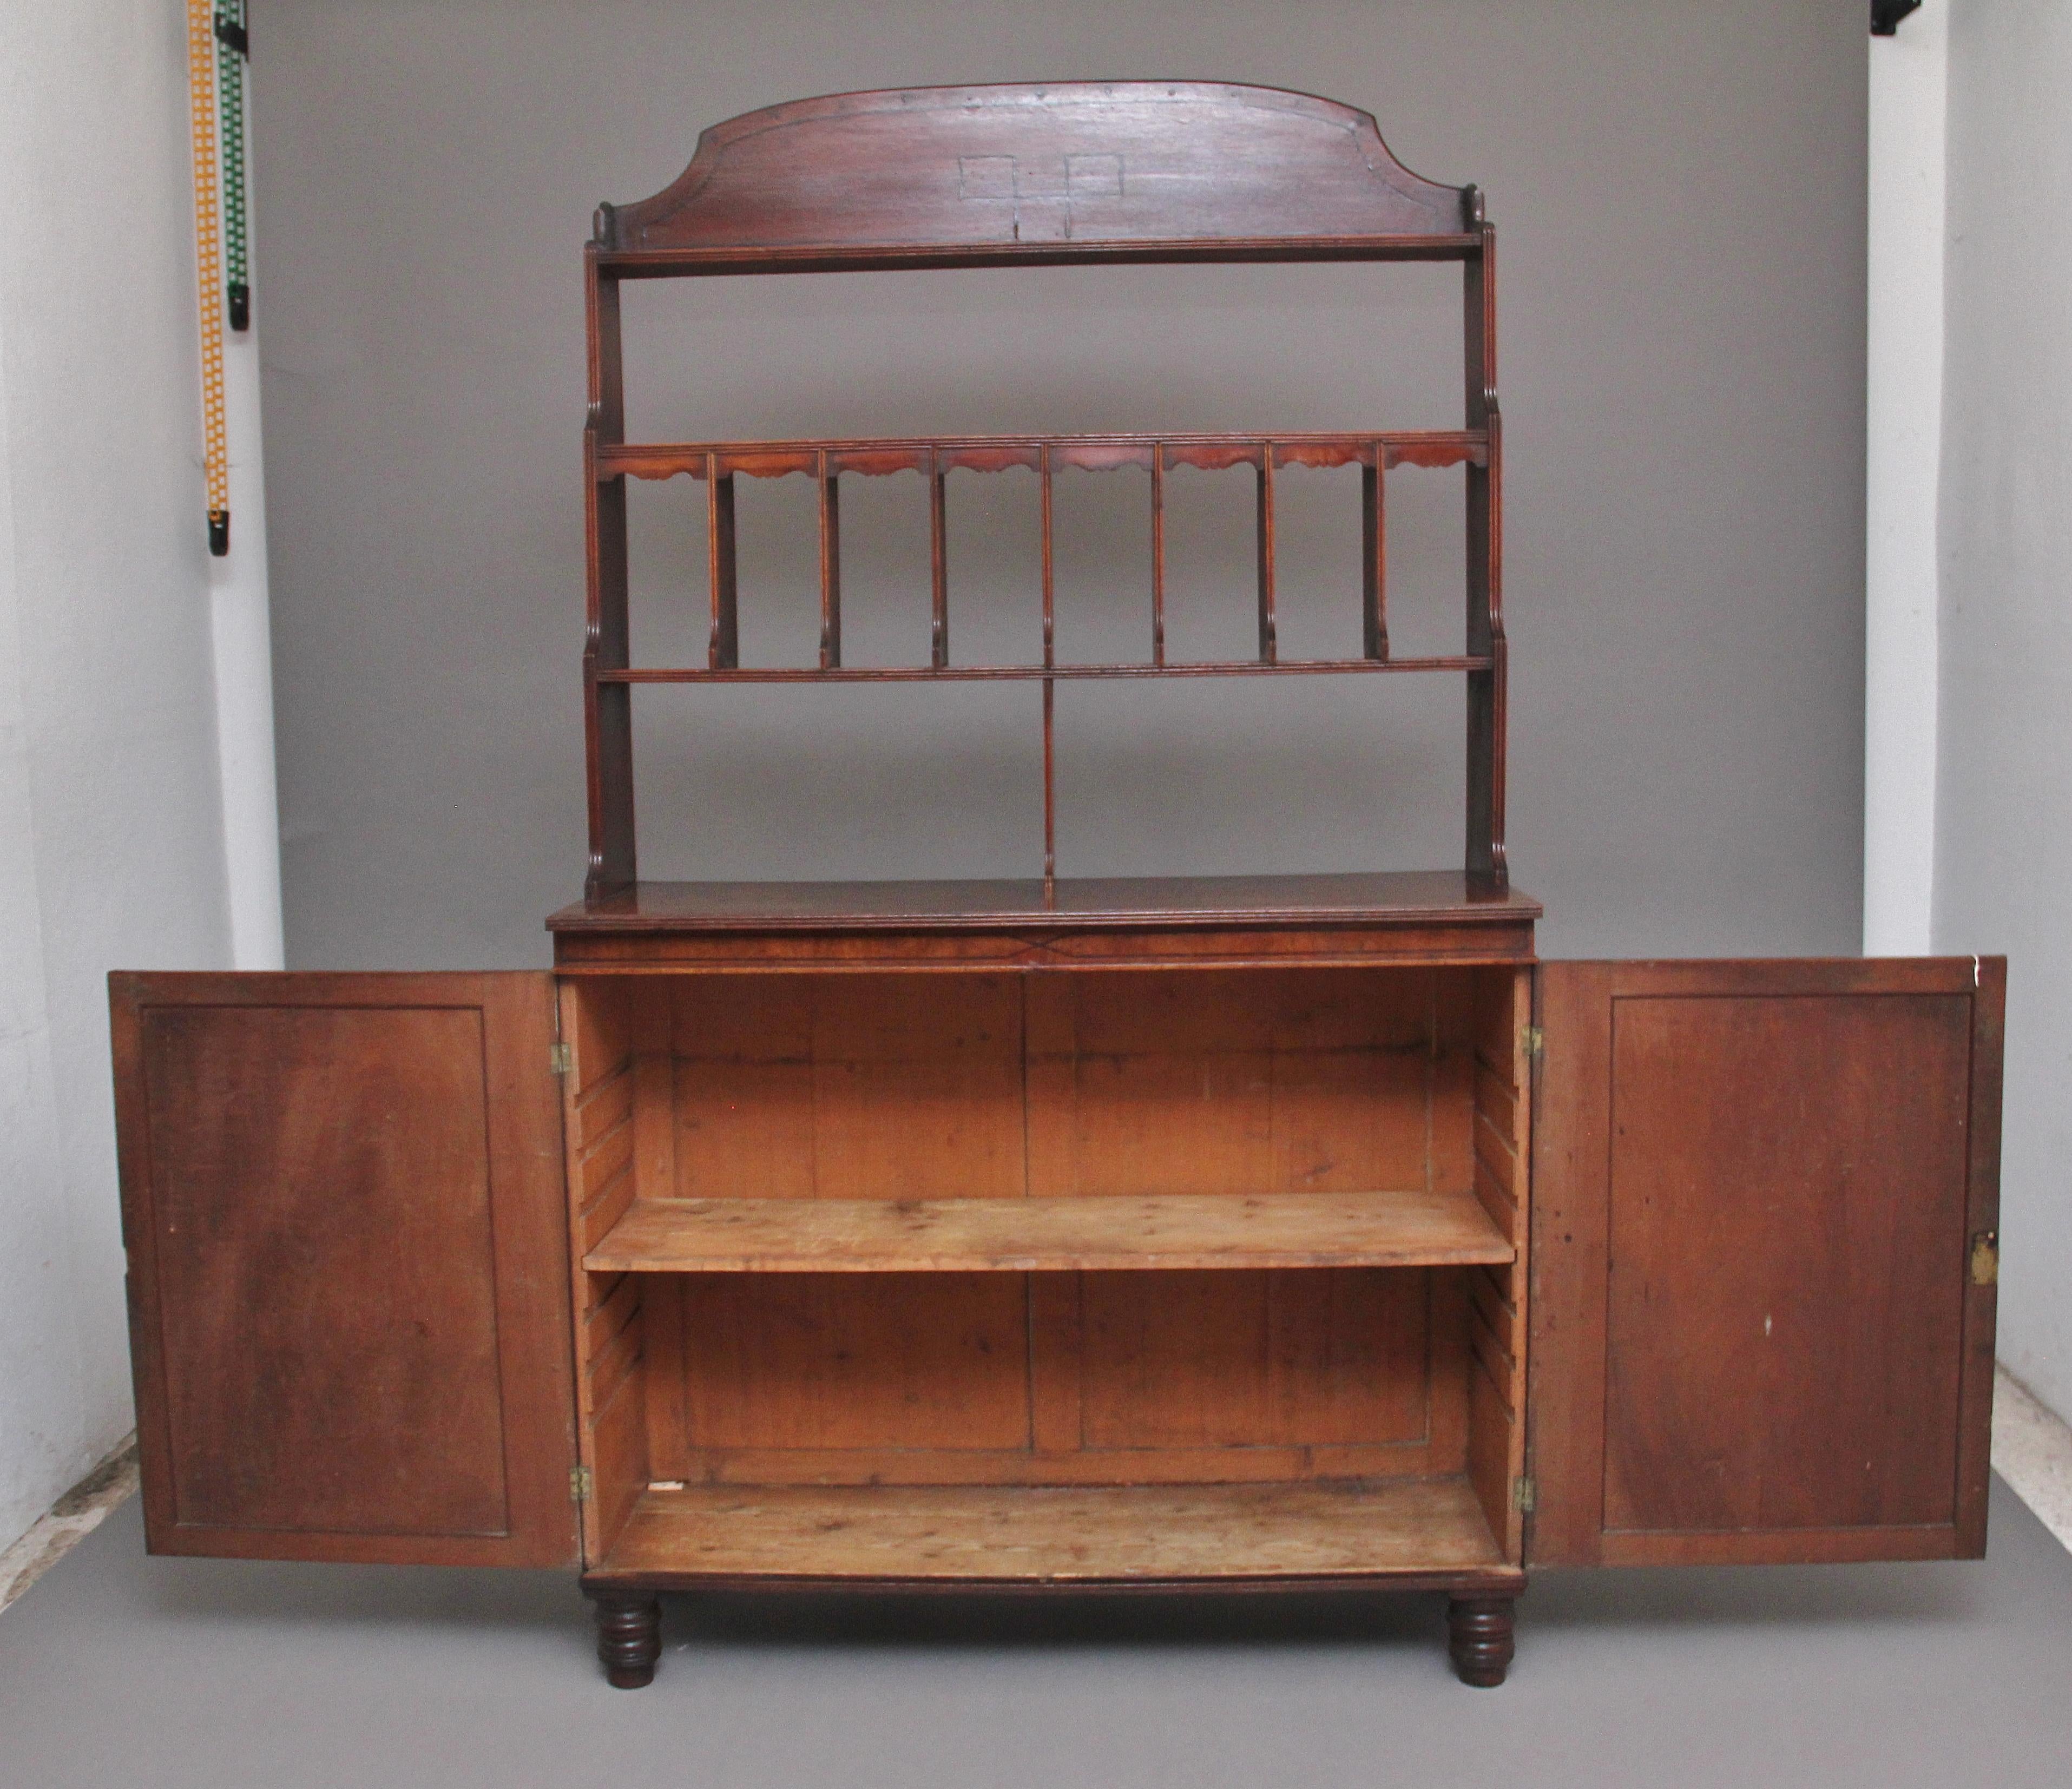 19th Century mahogany cabinet / bookcase, the open top section consisting of a decorative shaped and inlaid cornice and eight shelved compartments below with each compartment having a shaped top, the top section as well as the cabinet itself having